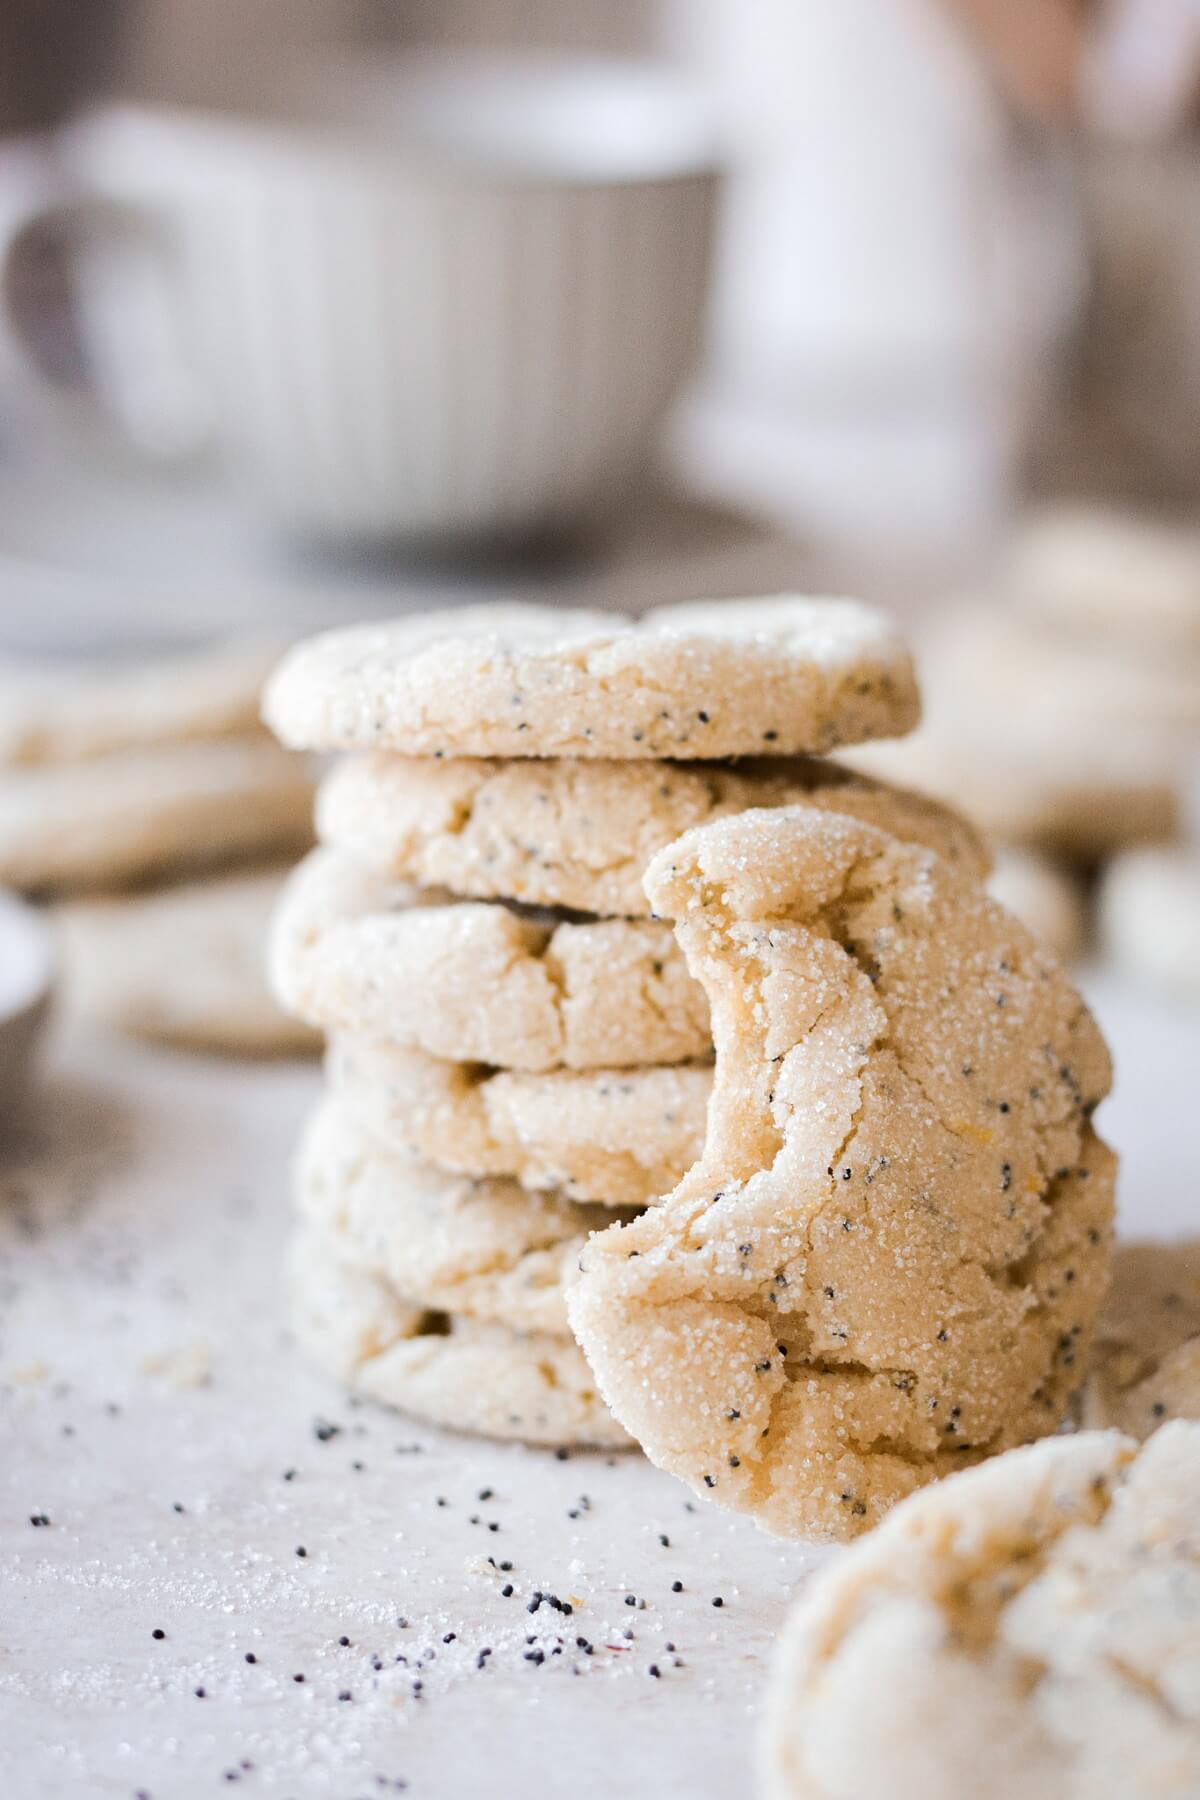 Stack of lemon poppy seed cookies, next to a cookie with a bite taken.